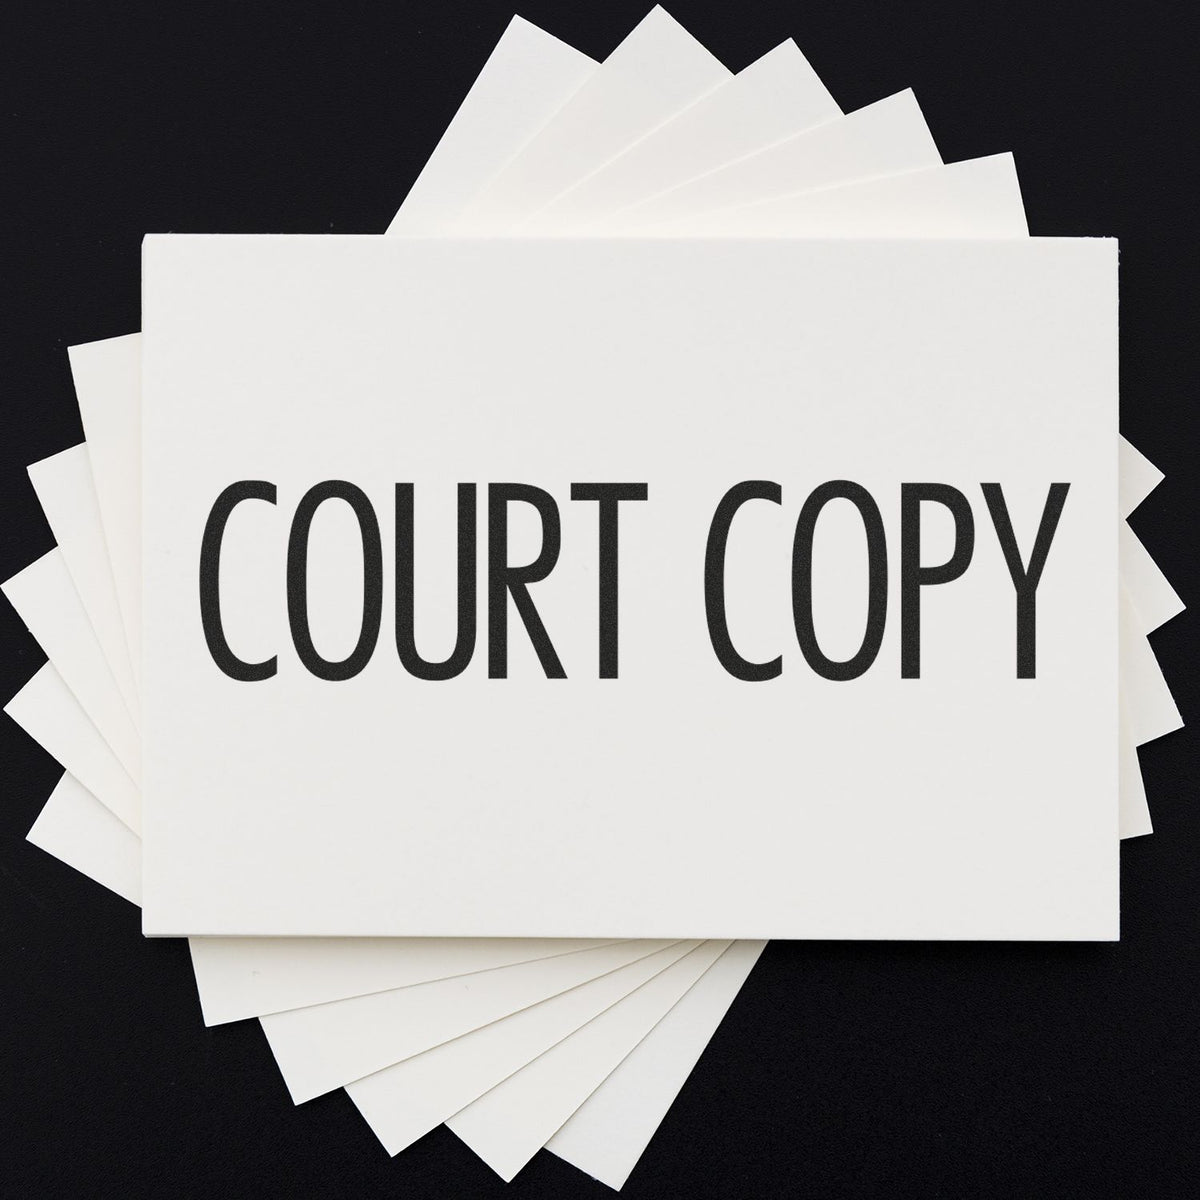 Large Narrow Font Court Copy Rubber Stamp Lifestyle Photo